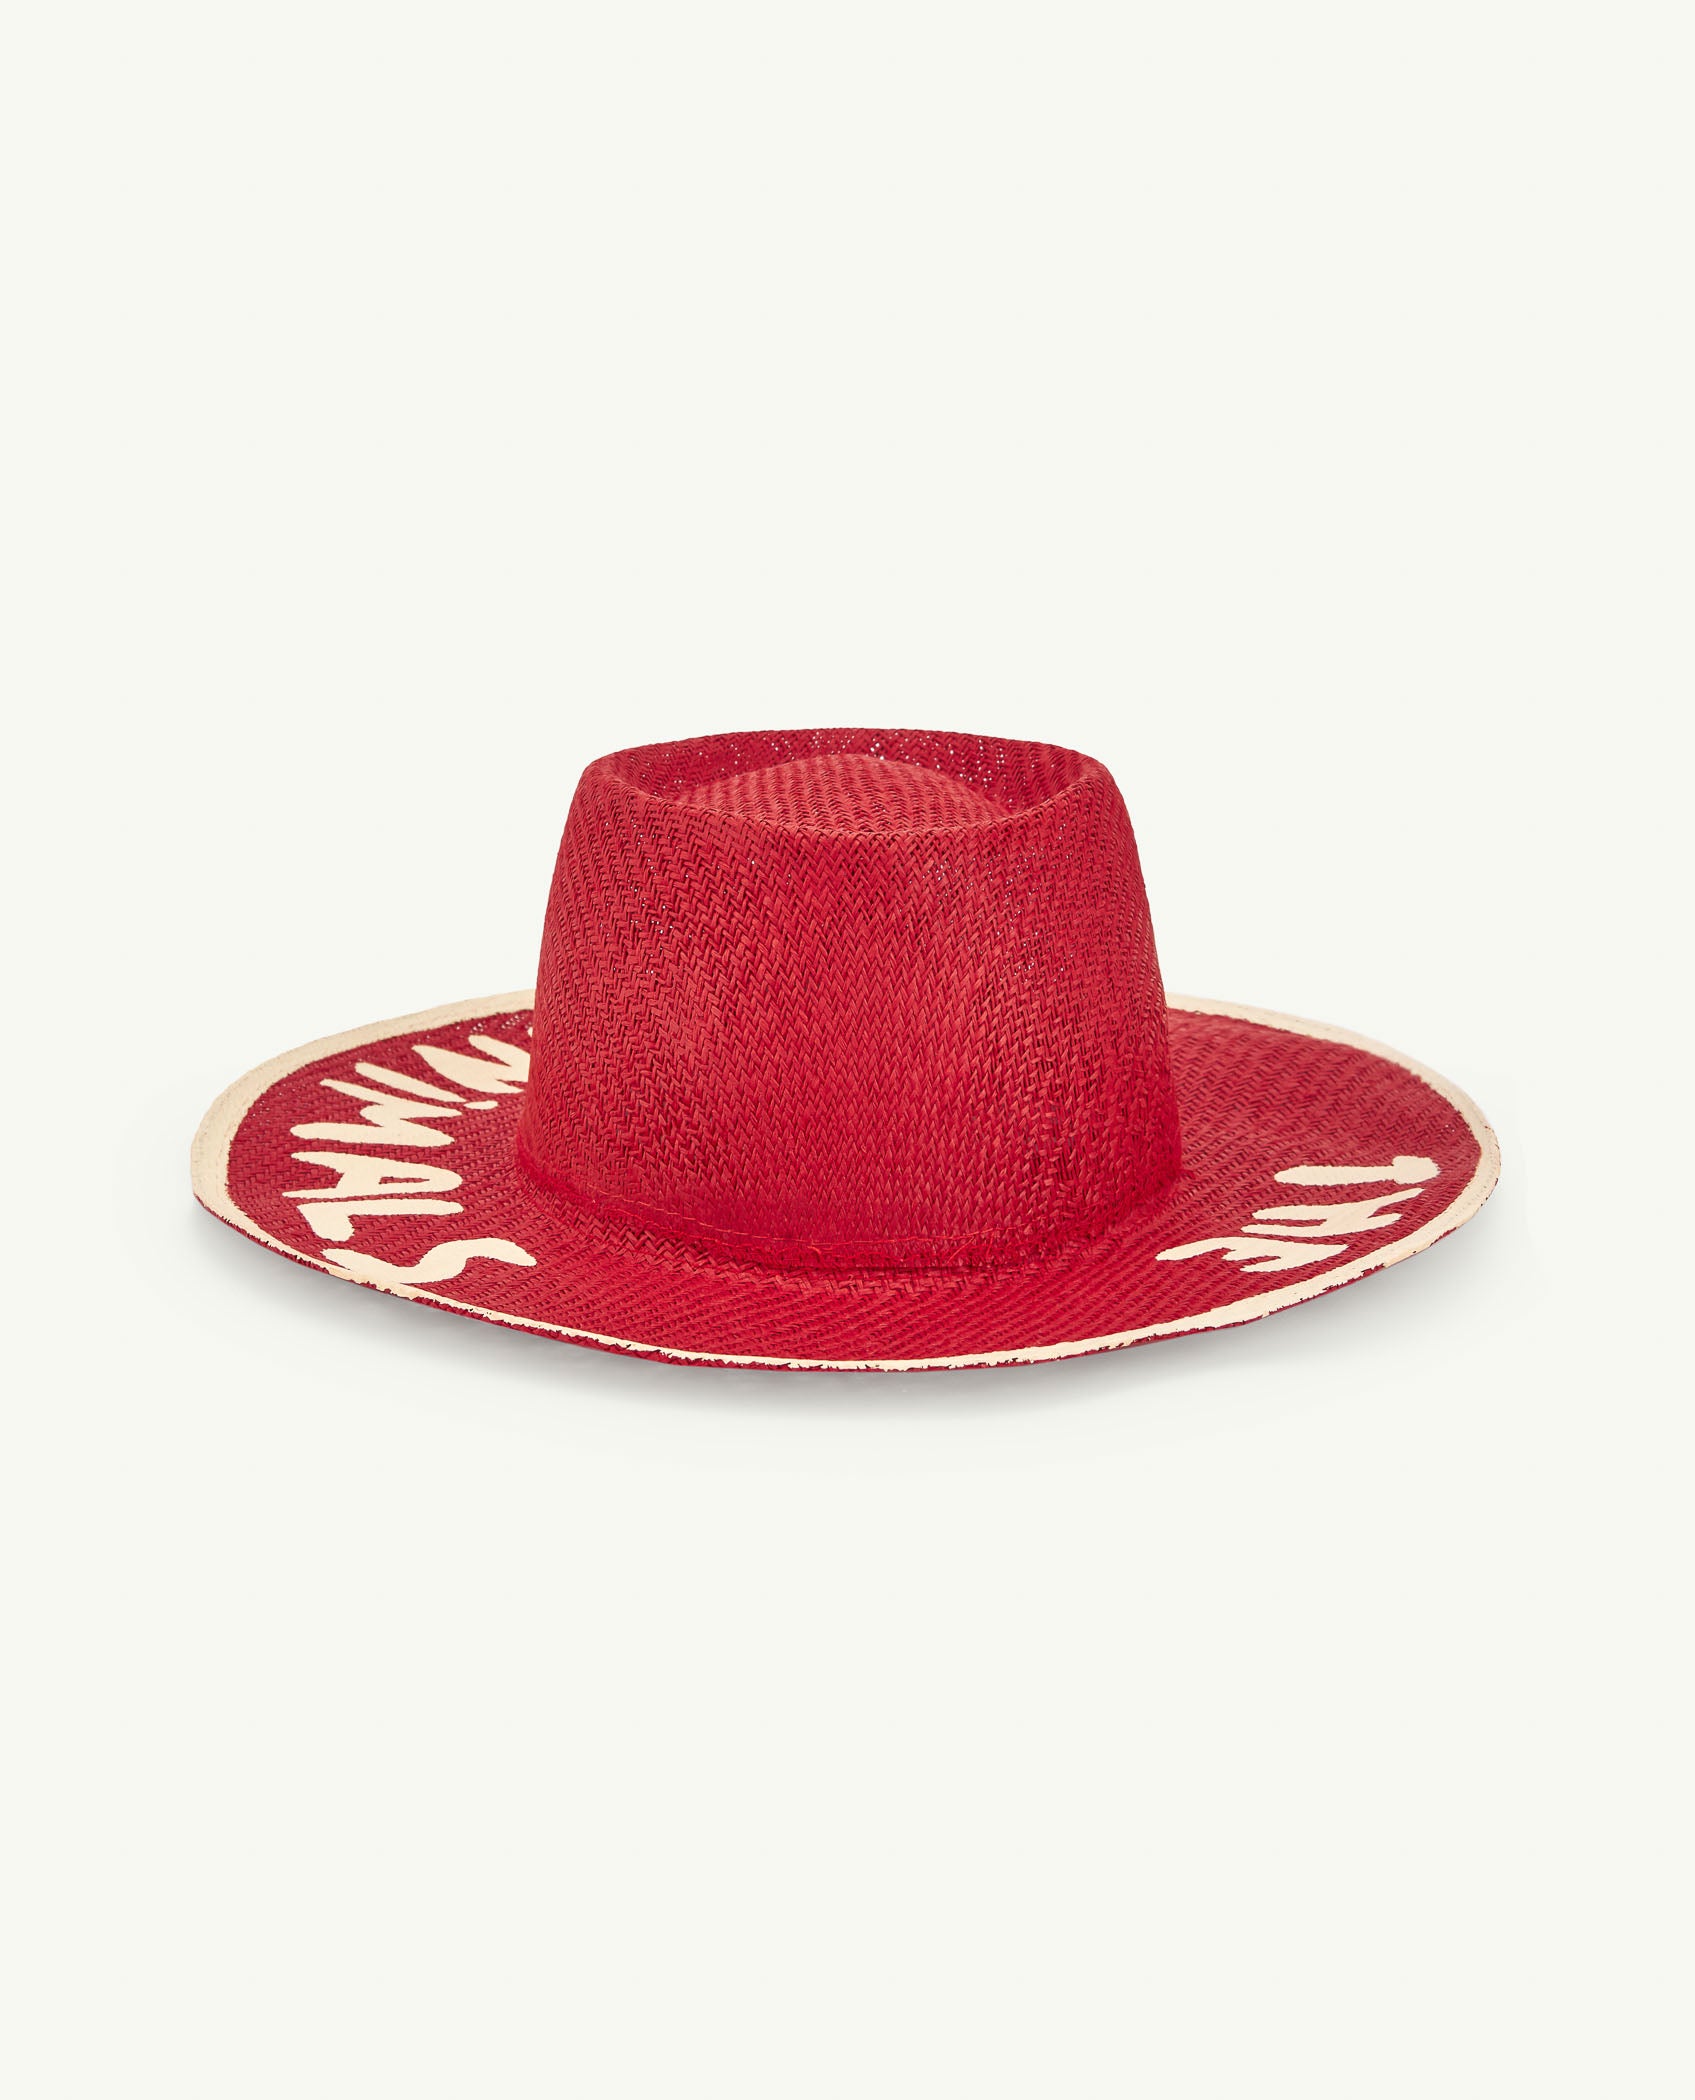 NEW The Animals Observatory | Cowboy Hat - Red